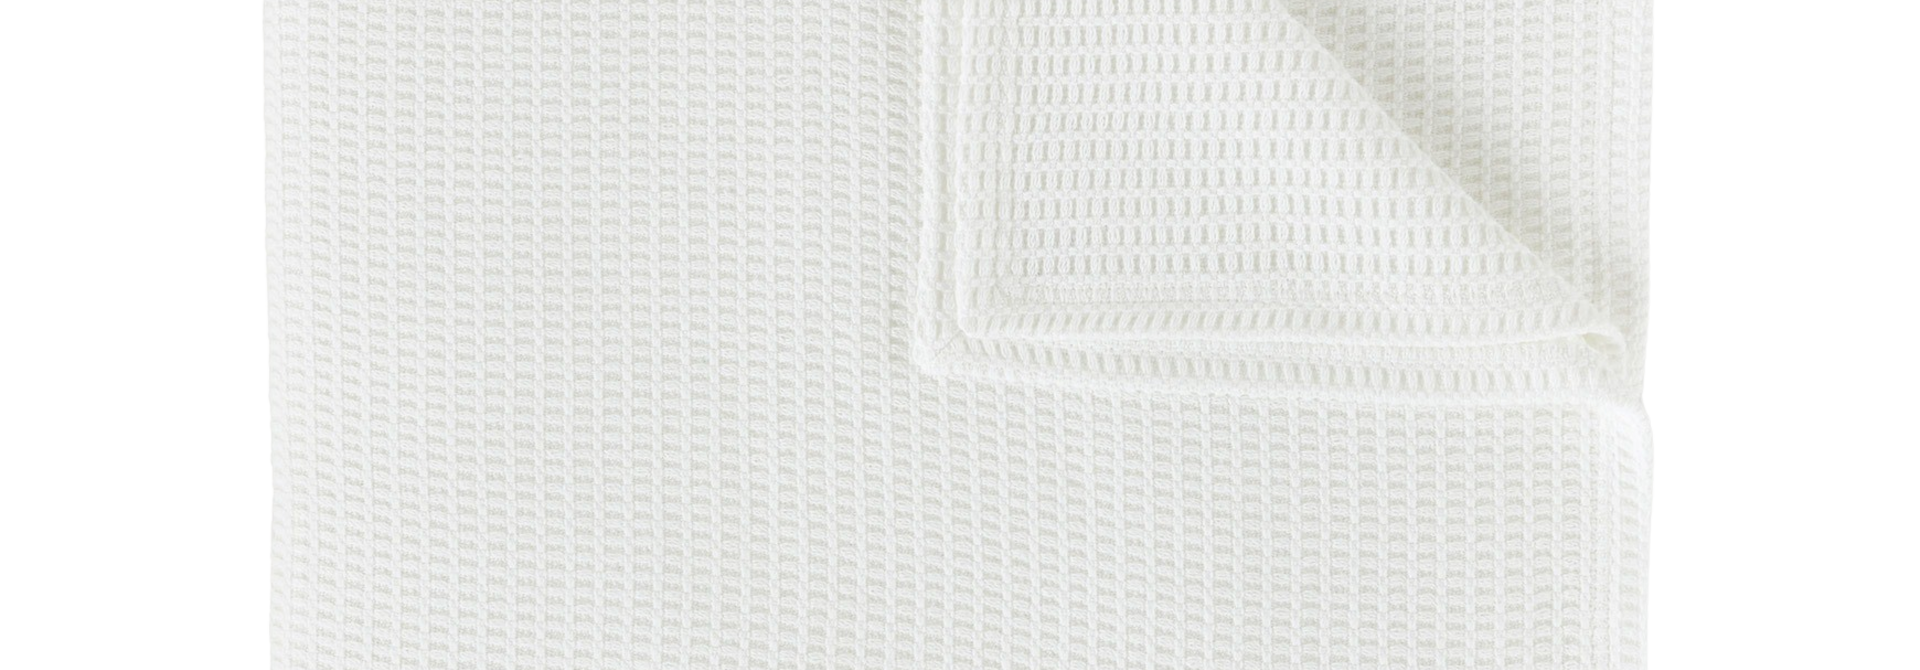 Riviera | The Peacock Alley Waffle Weave Blanket Collection